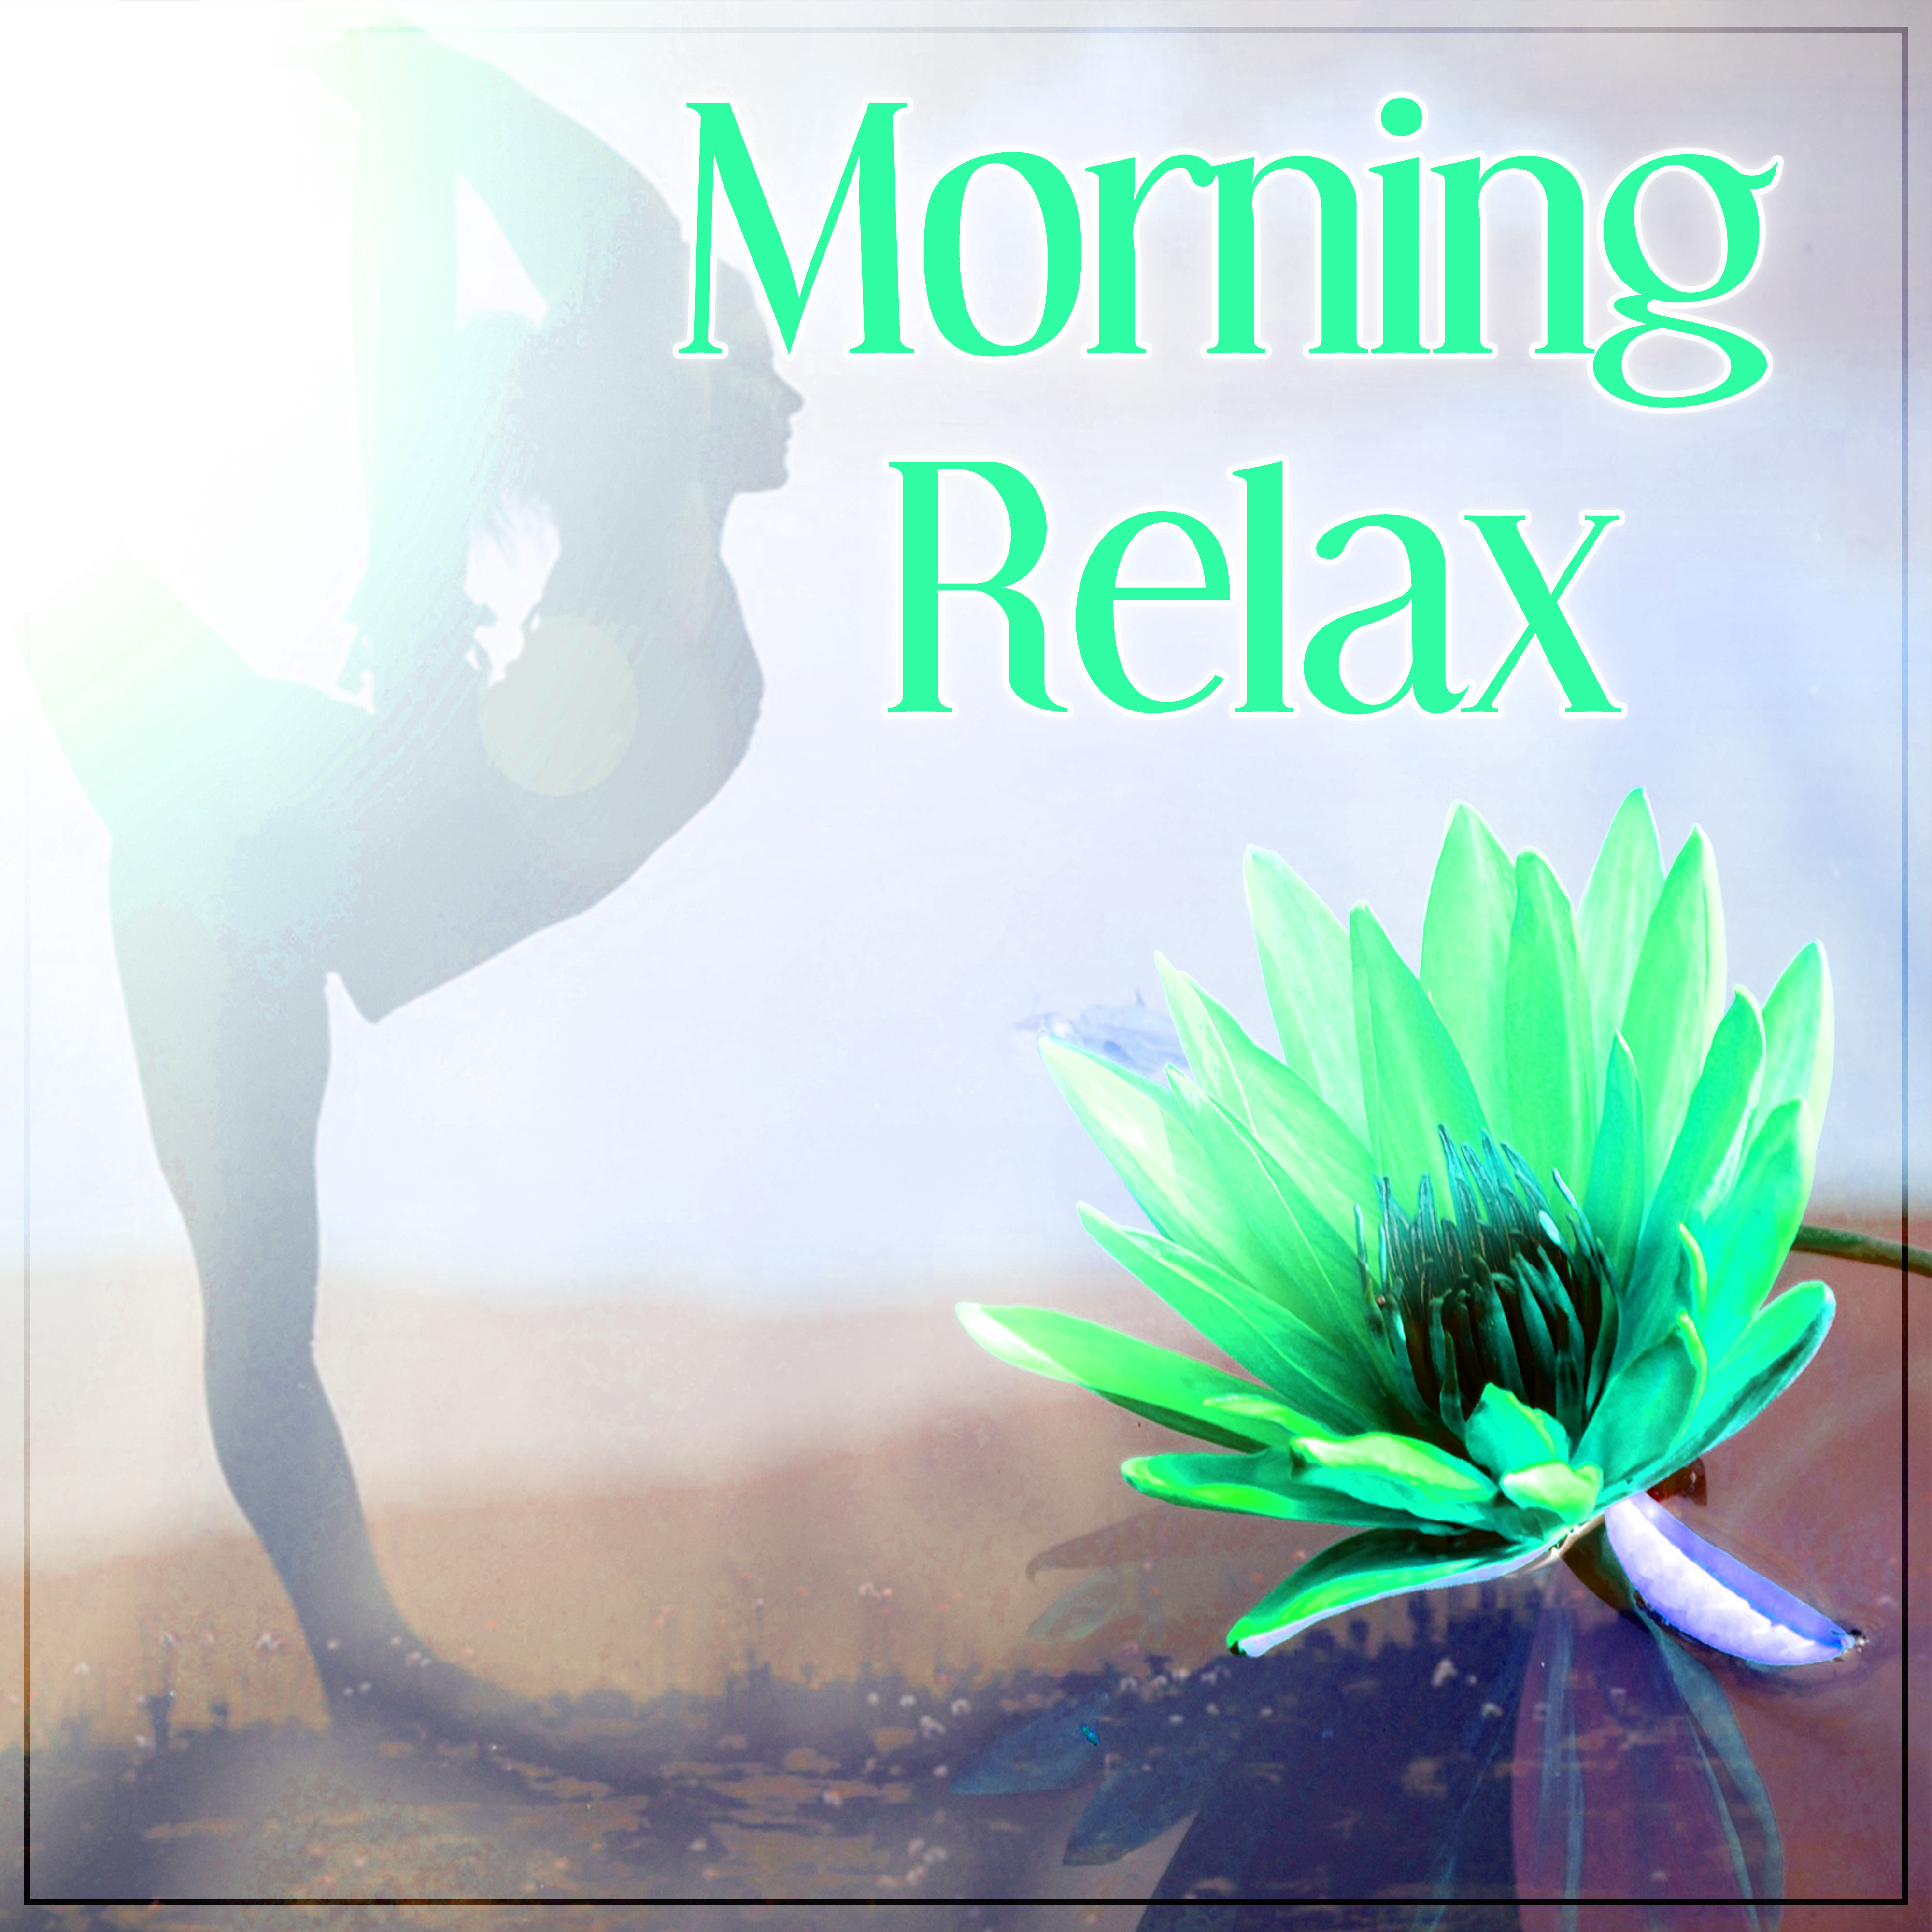 Morning Relax  Peaceful New Age Music for Start Day with Positive Energy, Mindfulness Meditations, Best Relaxation Music, Calm Down, Sound Therapy